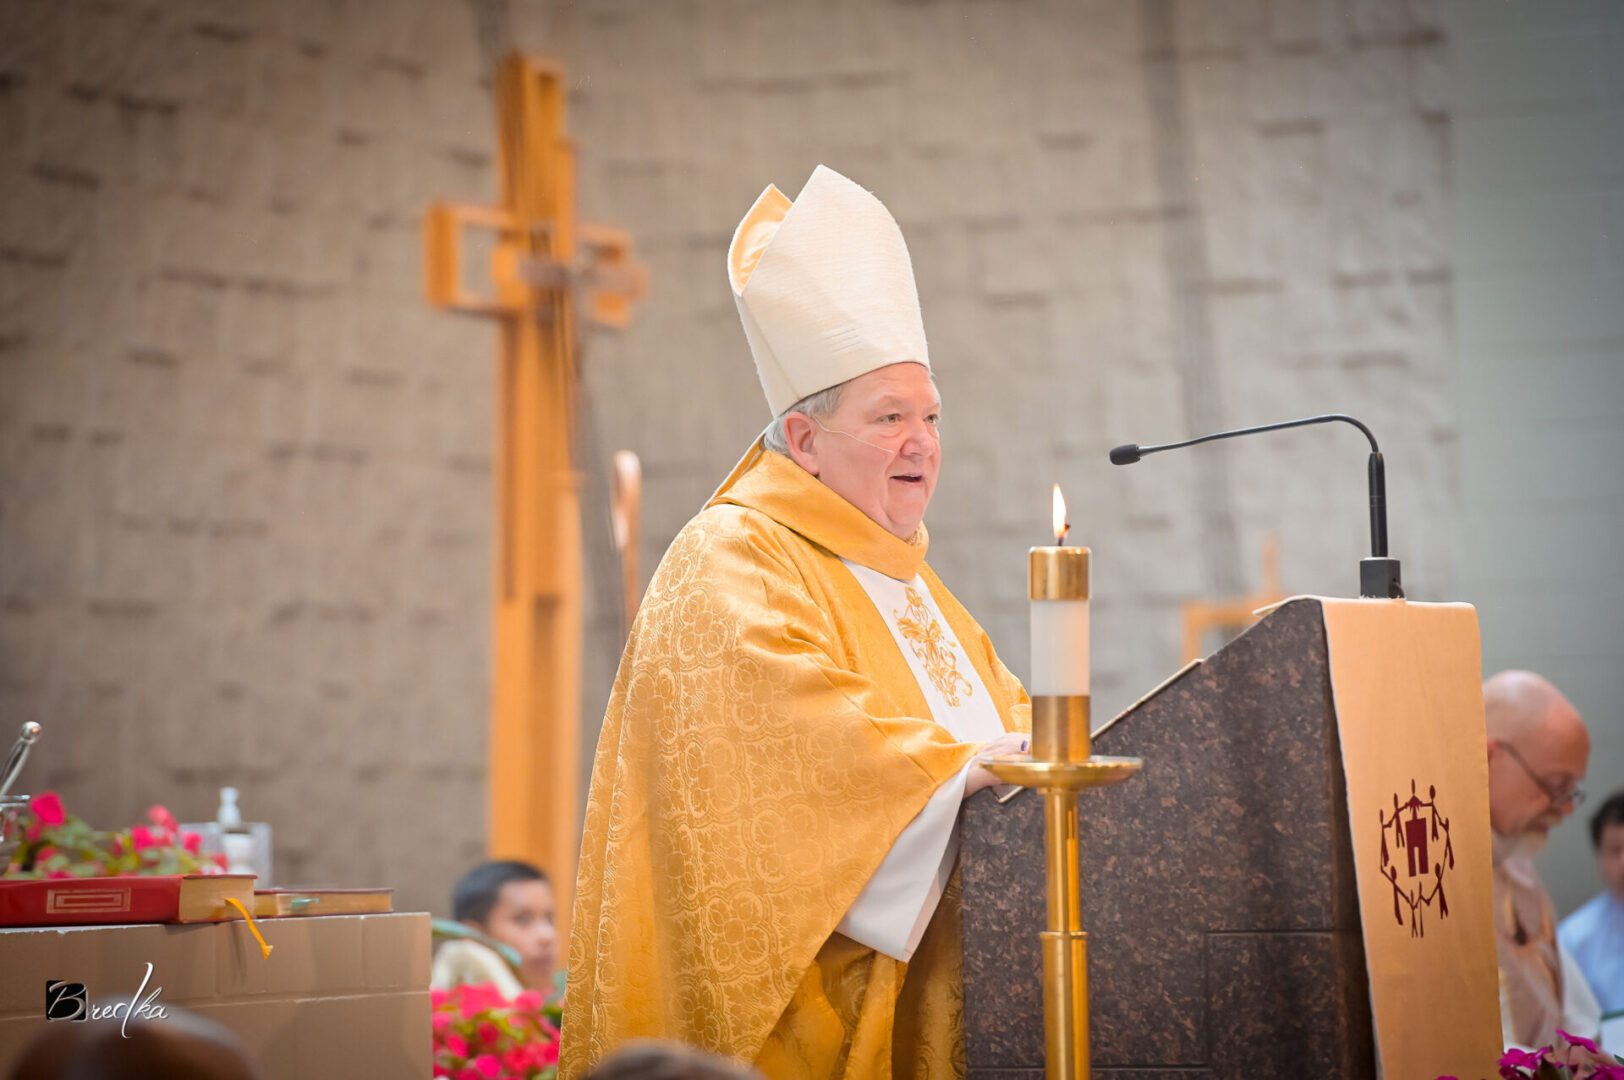 Bishop speaking at a religious ceremony.